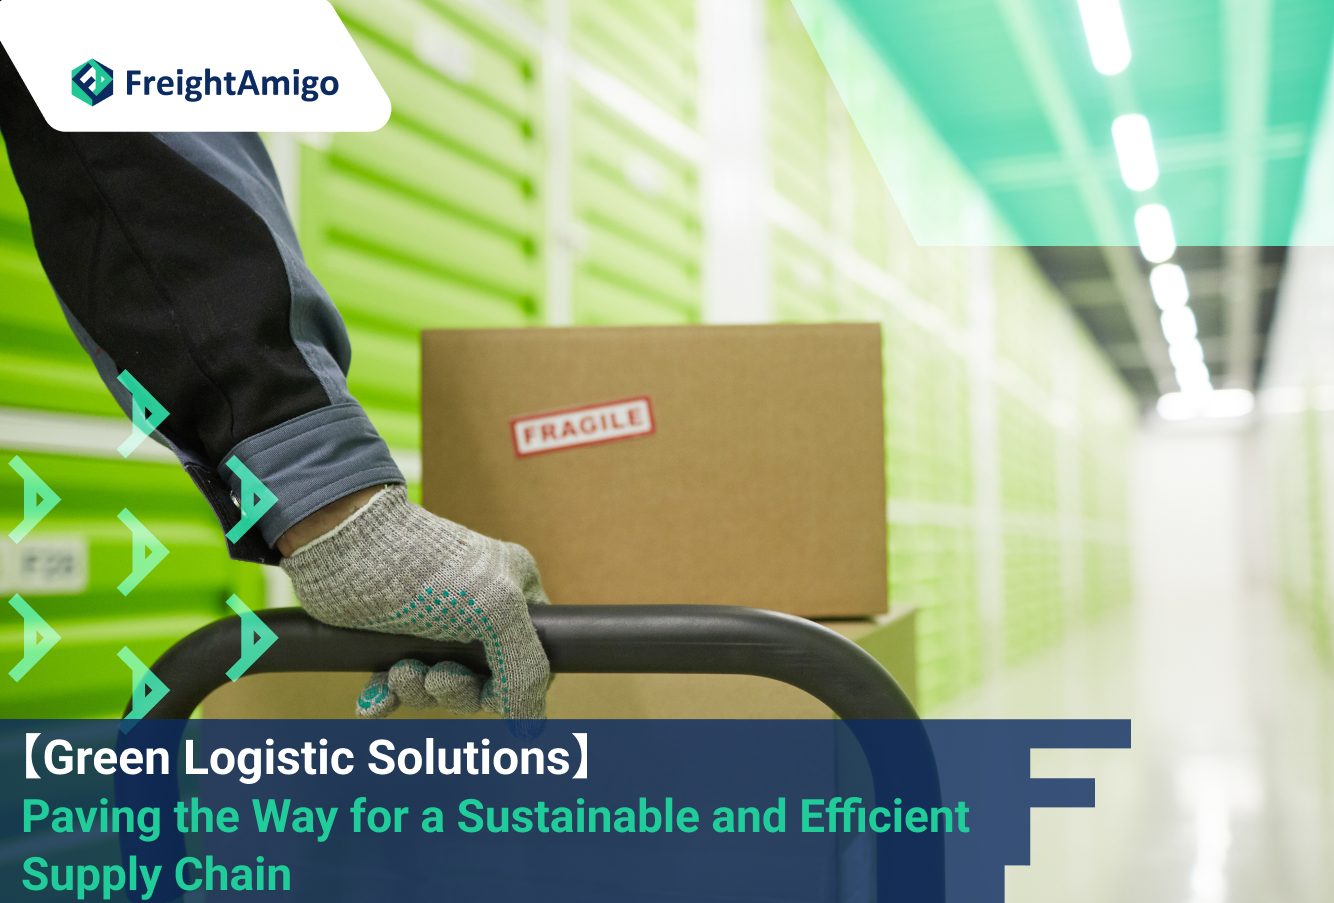 Green Logistic Solutions: Paving the Way for a Sustainable and Efficient Supply Chain, FreightAmigo